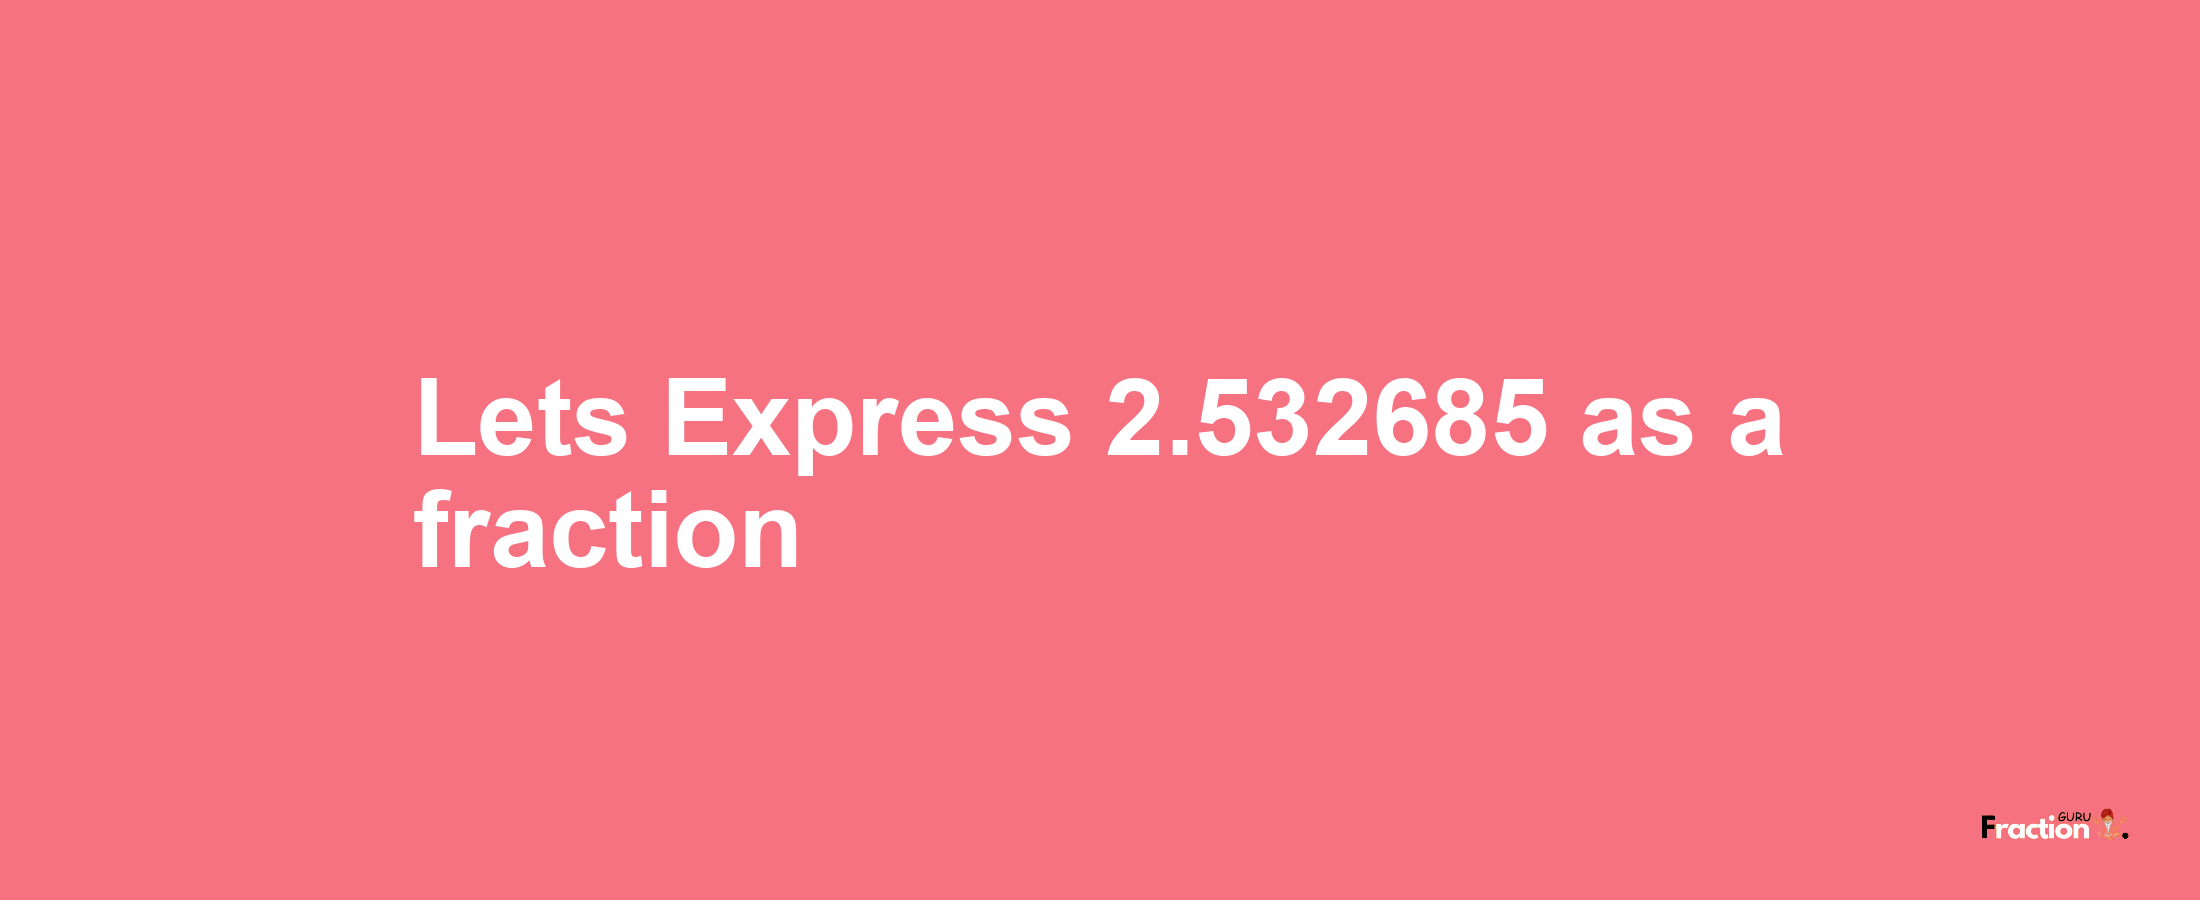 Lets Express 2.532685 as afraction